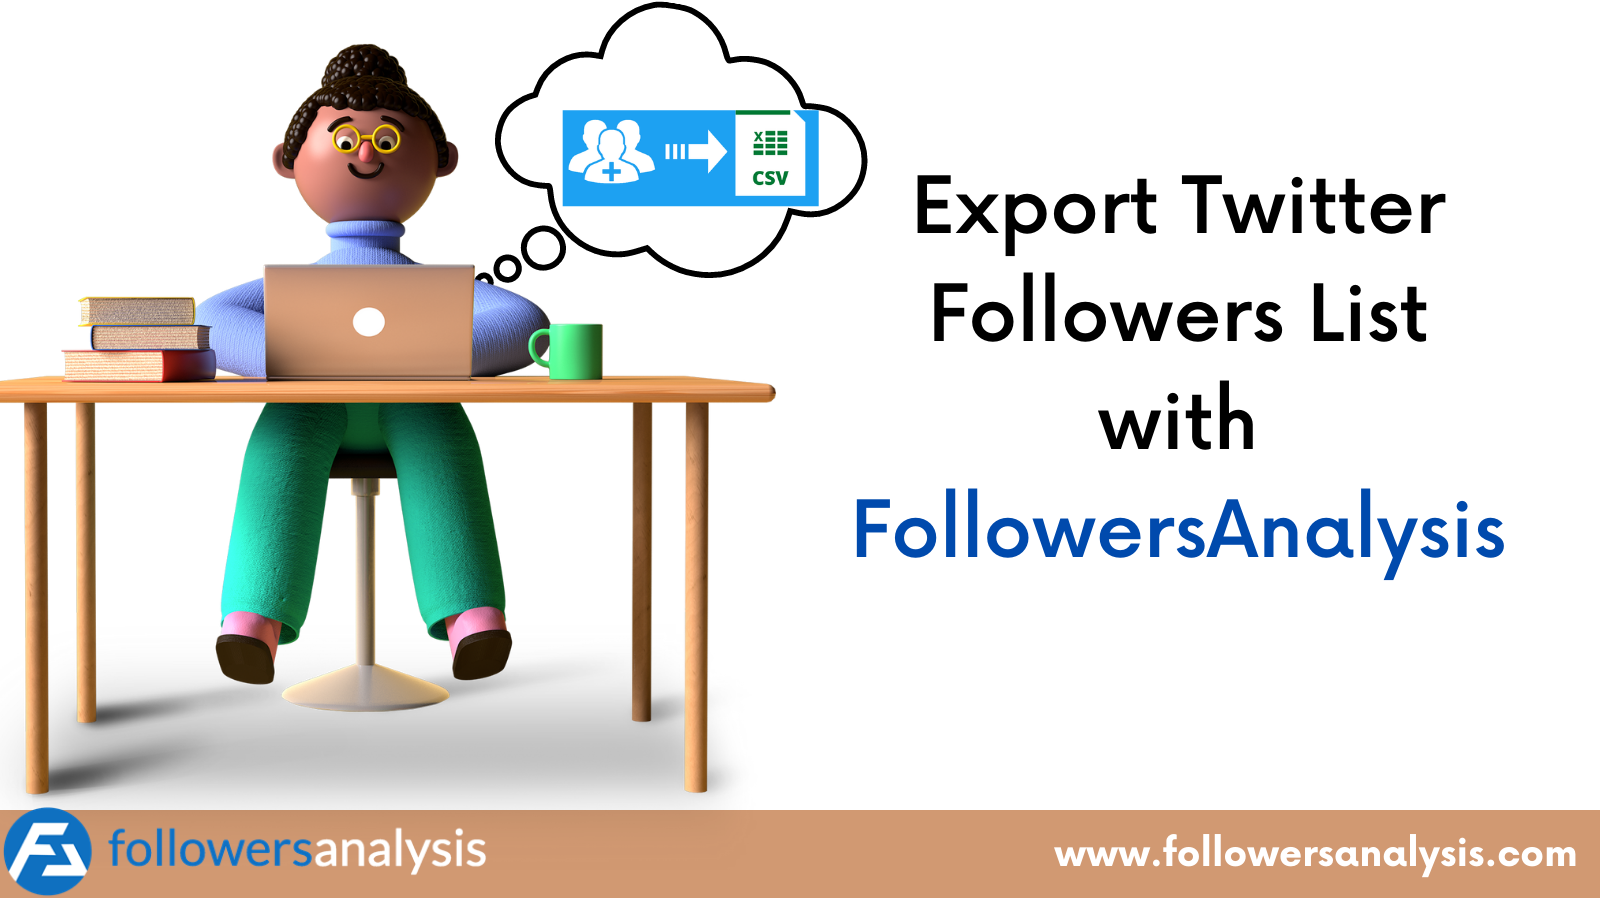 How can I export my Twitter followers into a CSV/Excel file for free